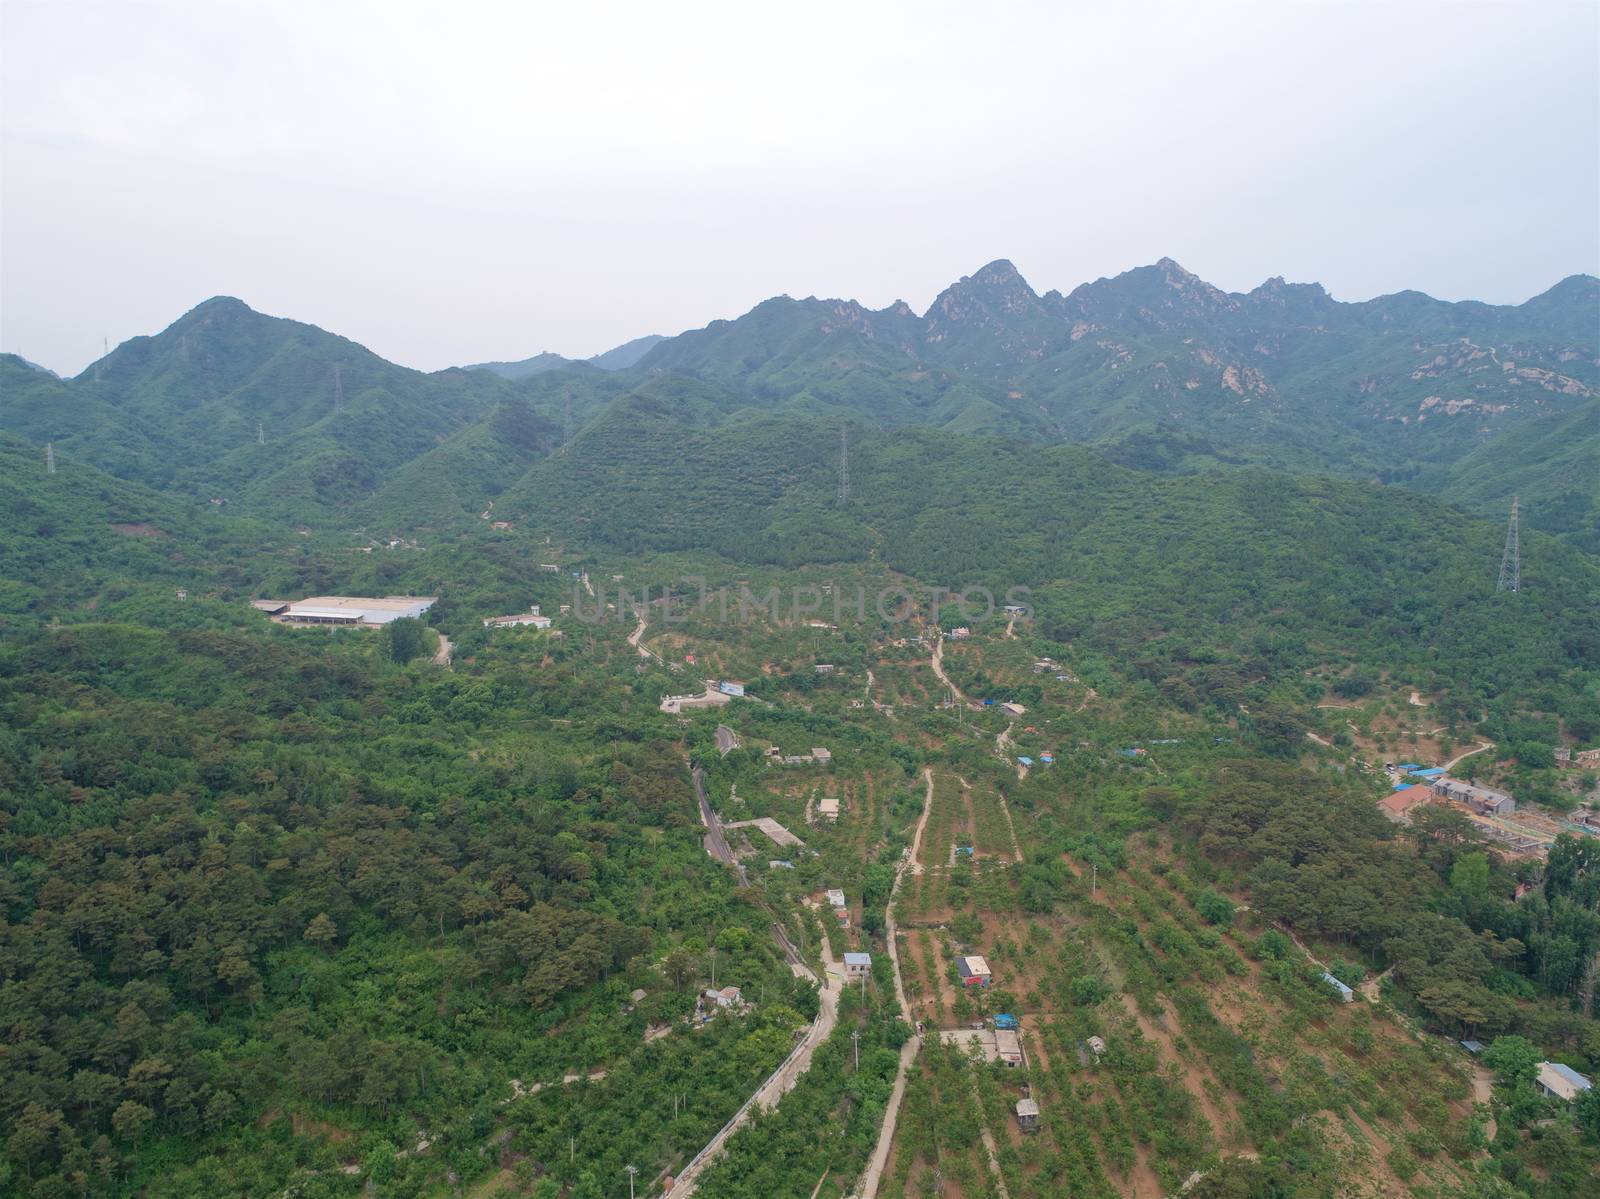 Aerial view of green Mountain in the region of Huaibei, China.